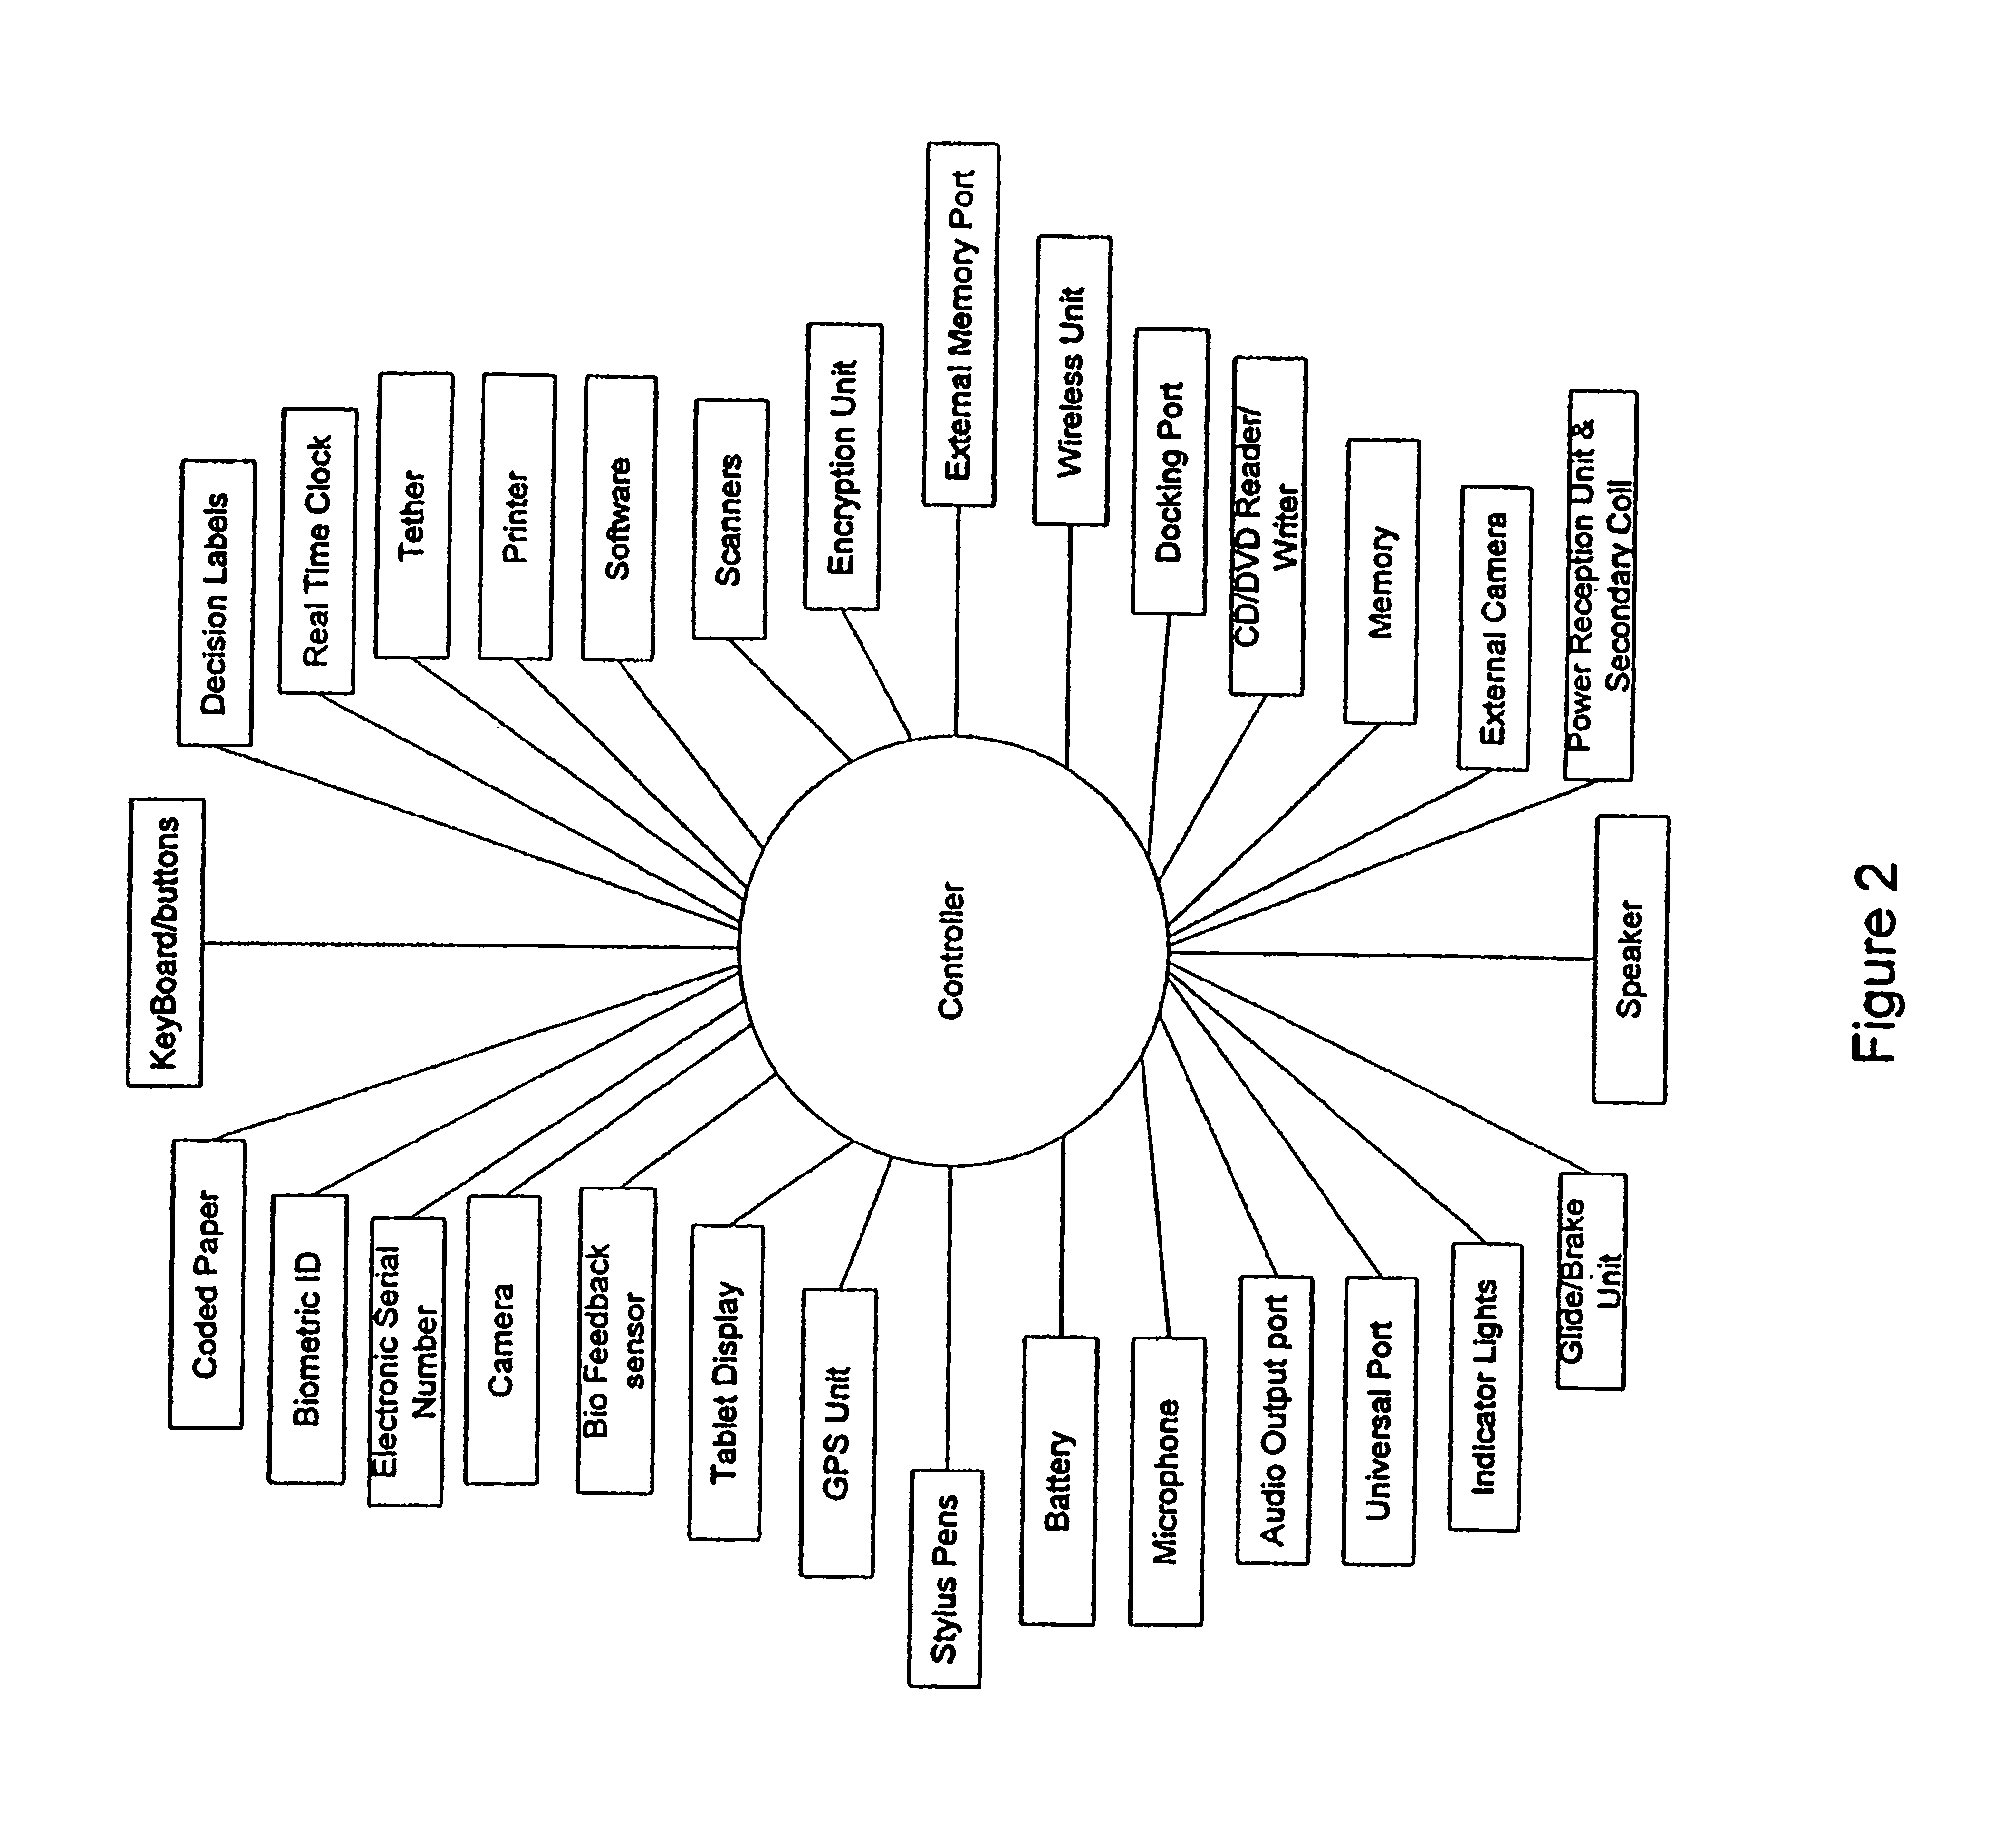 Transaction automation and archival system using electronic contract disclosure units